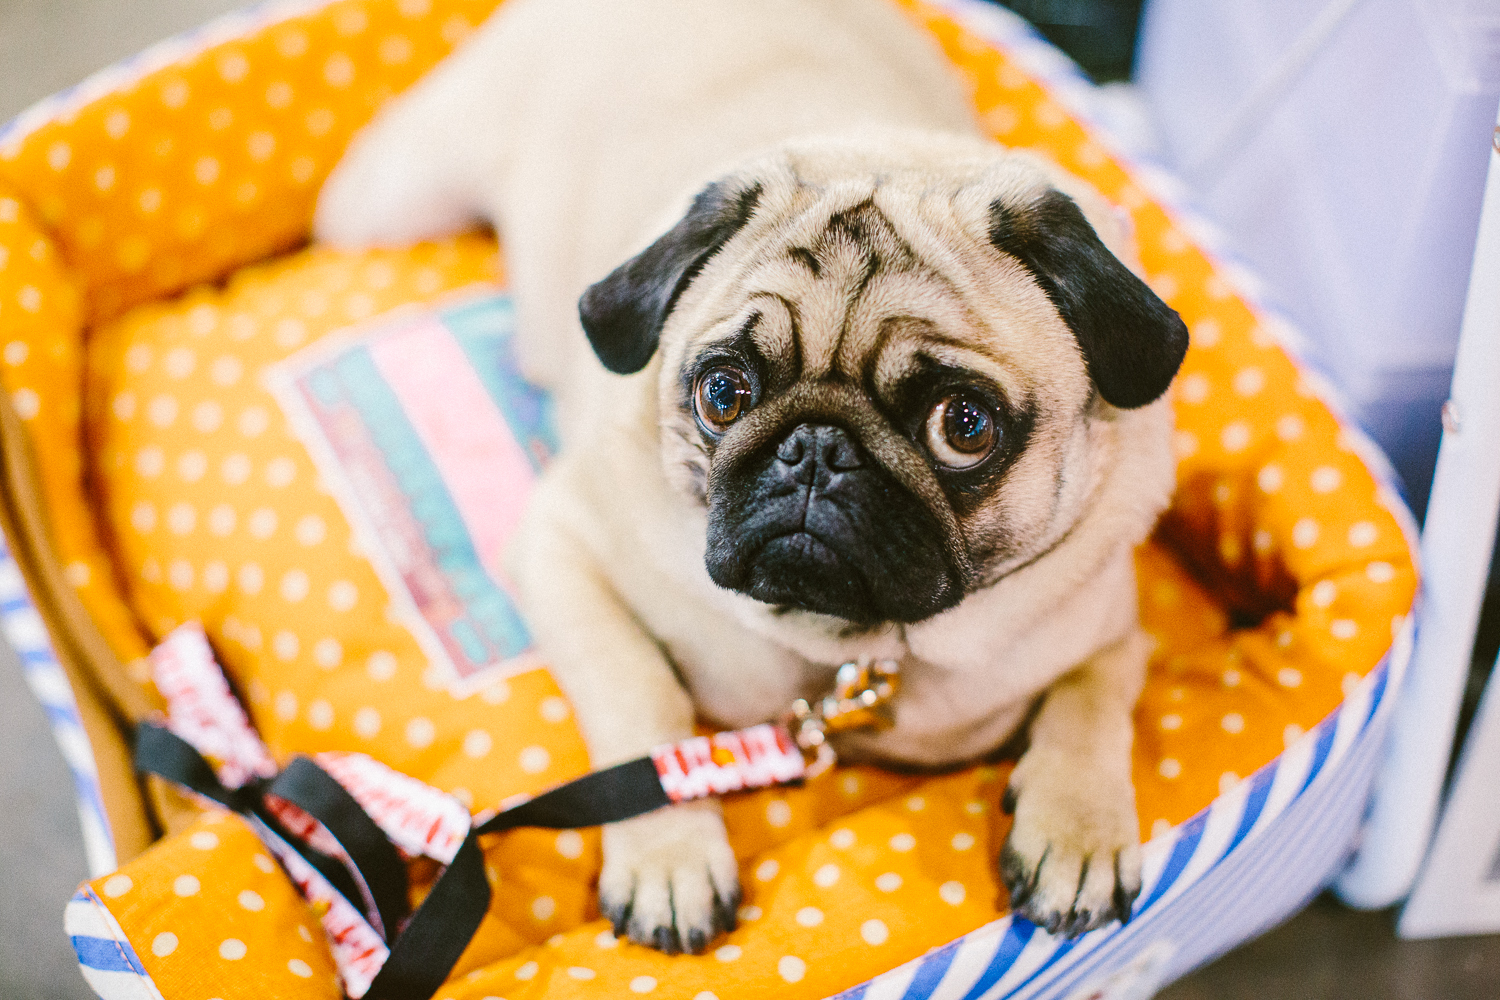 twoguineapigs_pet_photography_oh_jaffa_bow_ties_pug_dog_lovers_show_1500-27.jpg